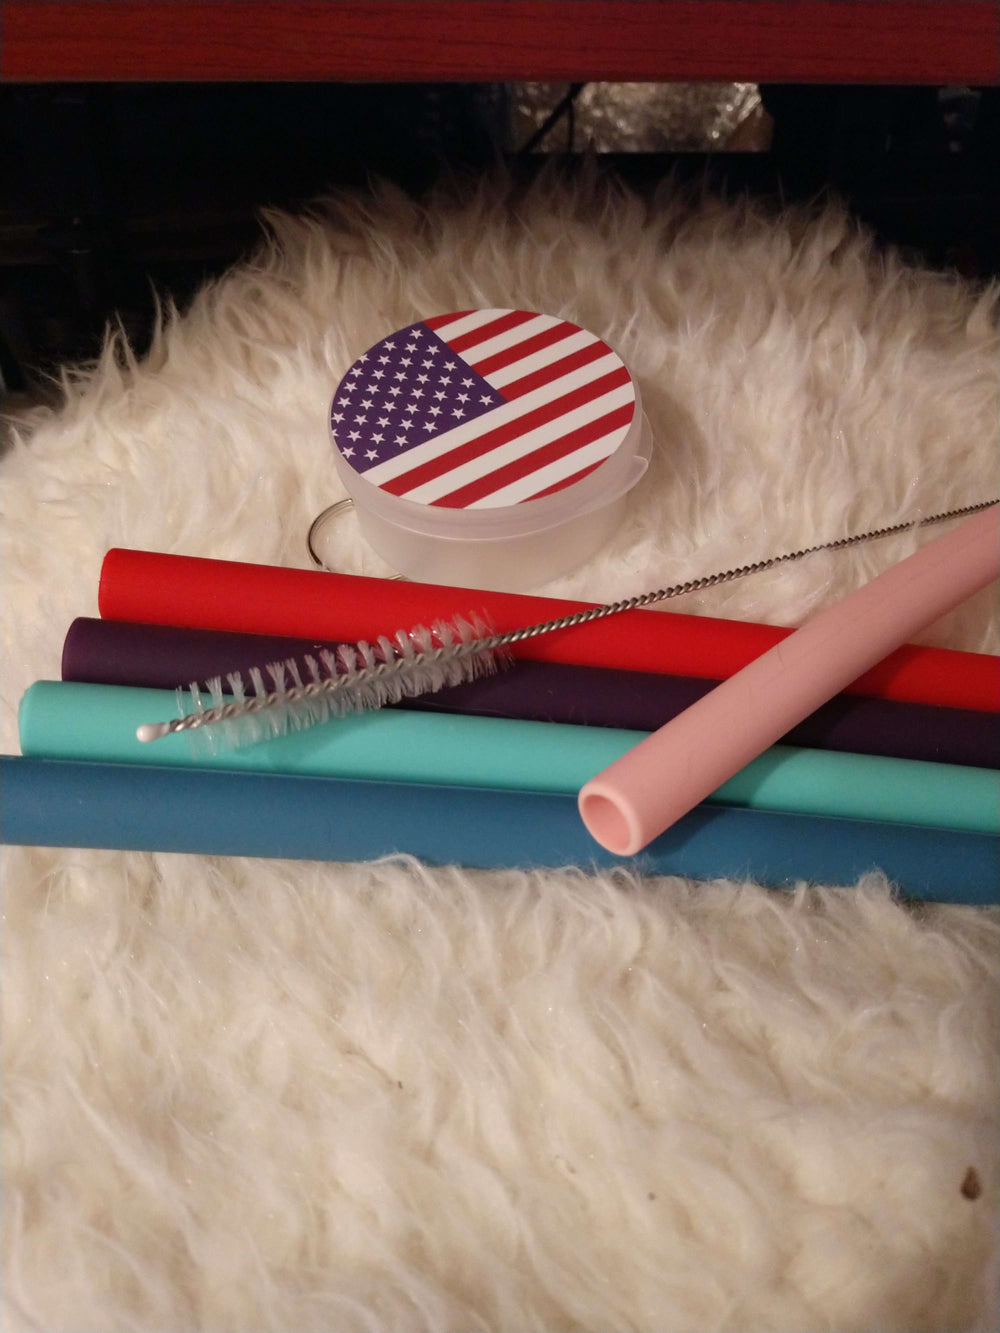 Designs by MyUtopia Shout Out:Special Offer on Extra Wide Milkshake Straws with U.S. Flag Case (10 inch long set of 5 Straws, 1 Case, 1 Cleaning Brush)